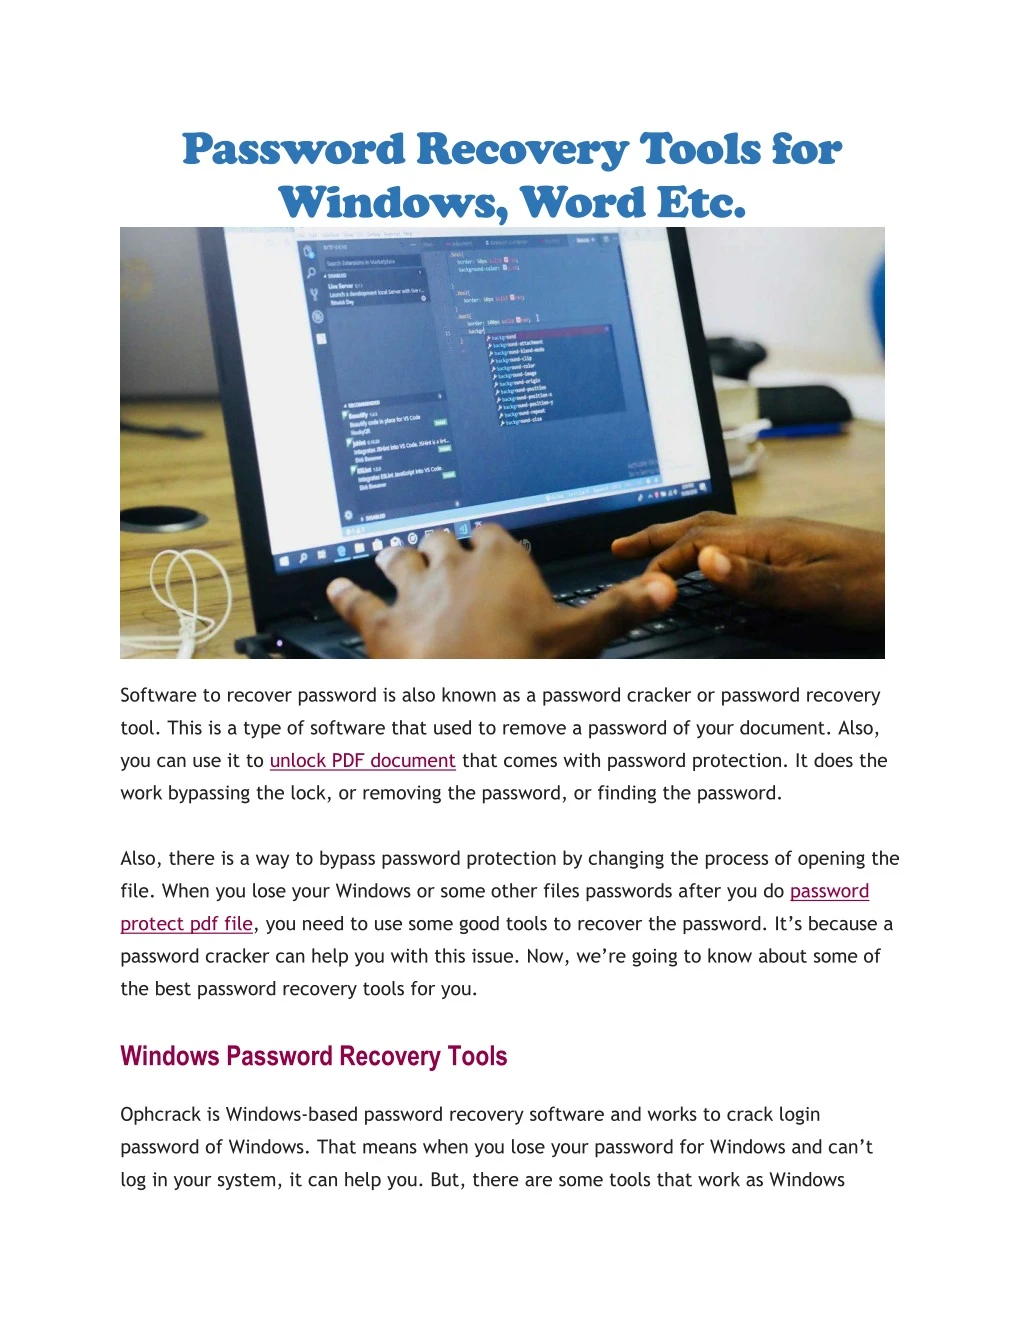 password recovery tools for windows word etc